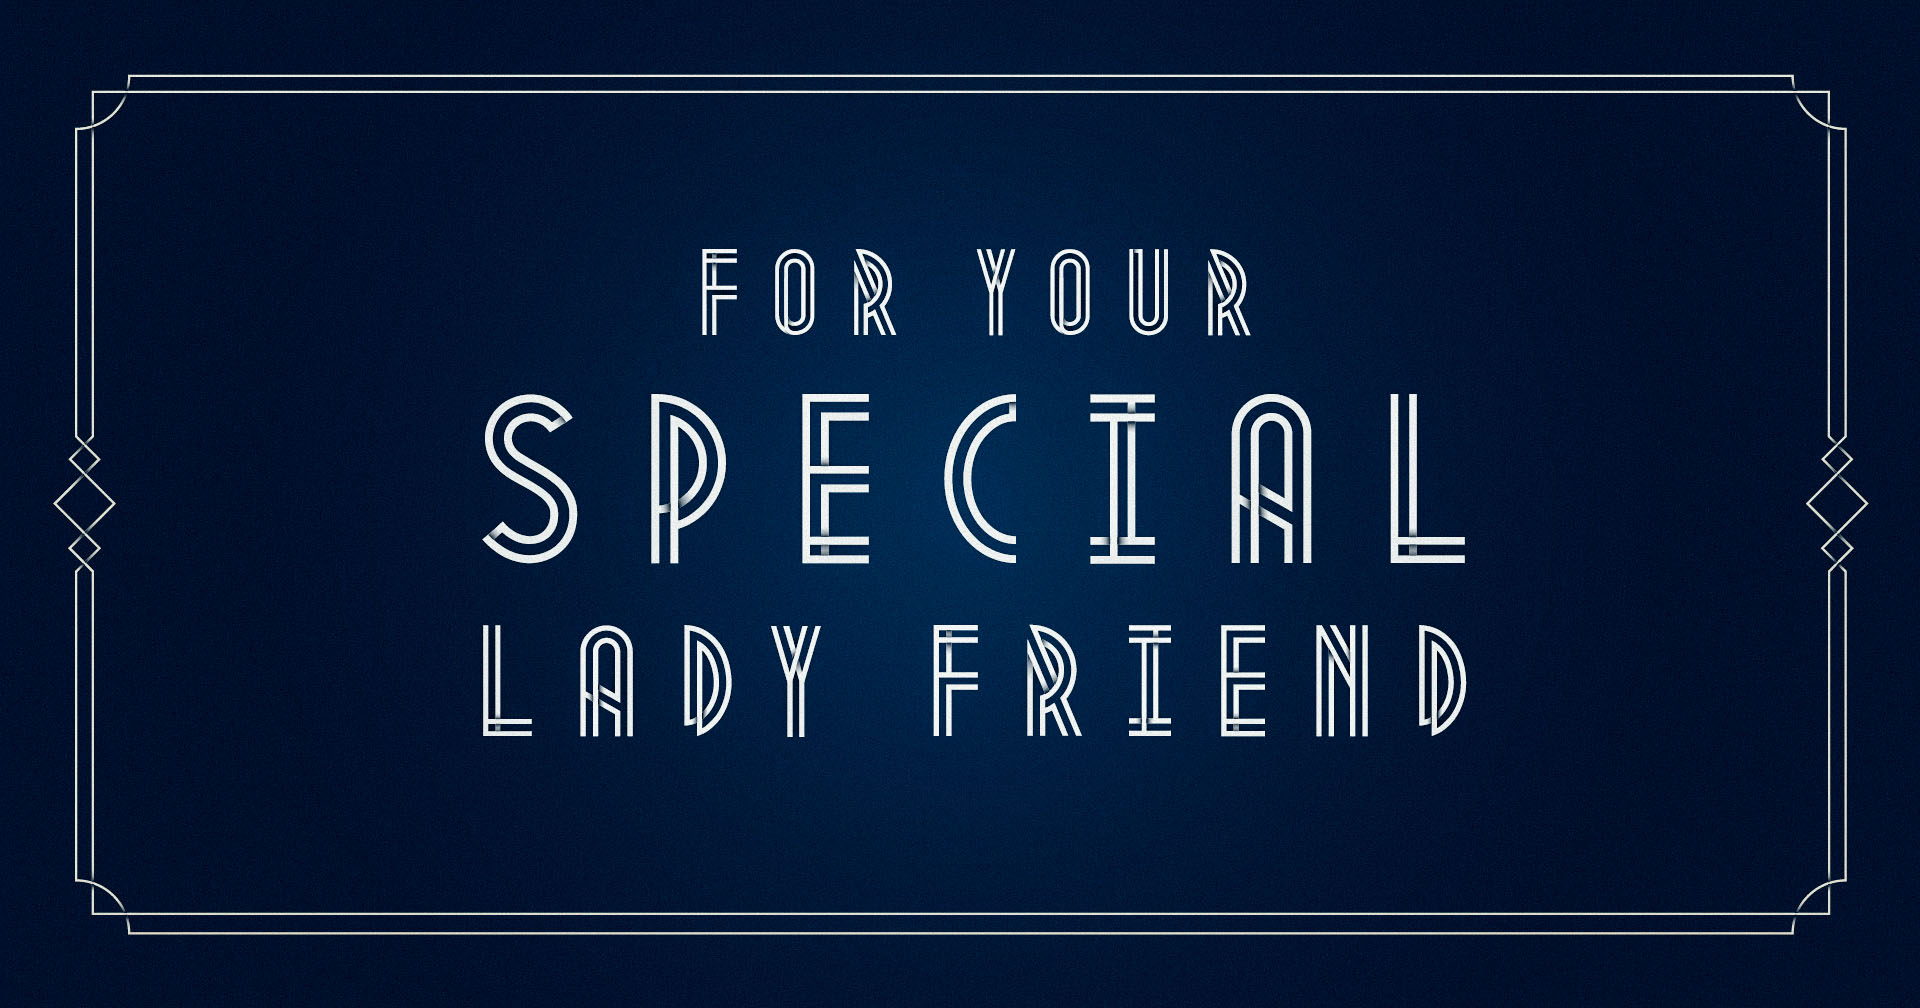 For Your Special Ladyfriend